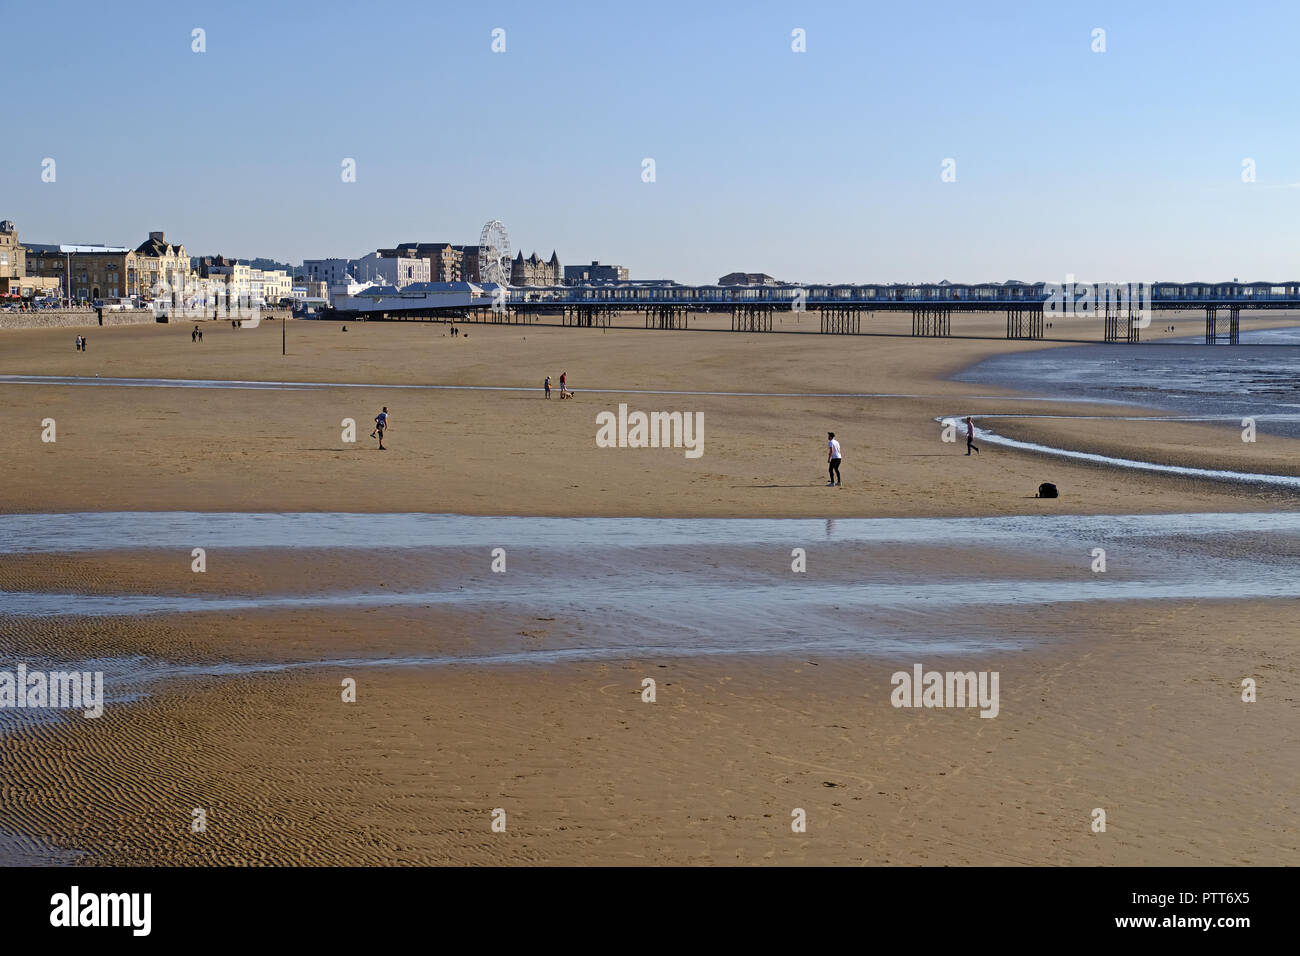 Weston-super-Mare, UK. 10th October, 2018. UK weather: walkers on the beach enjoy the sunshine as the temperature reaches 70º F. Keith Ramsey/Alamy Live News Stock Photo